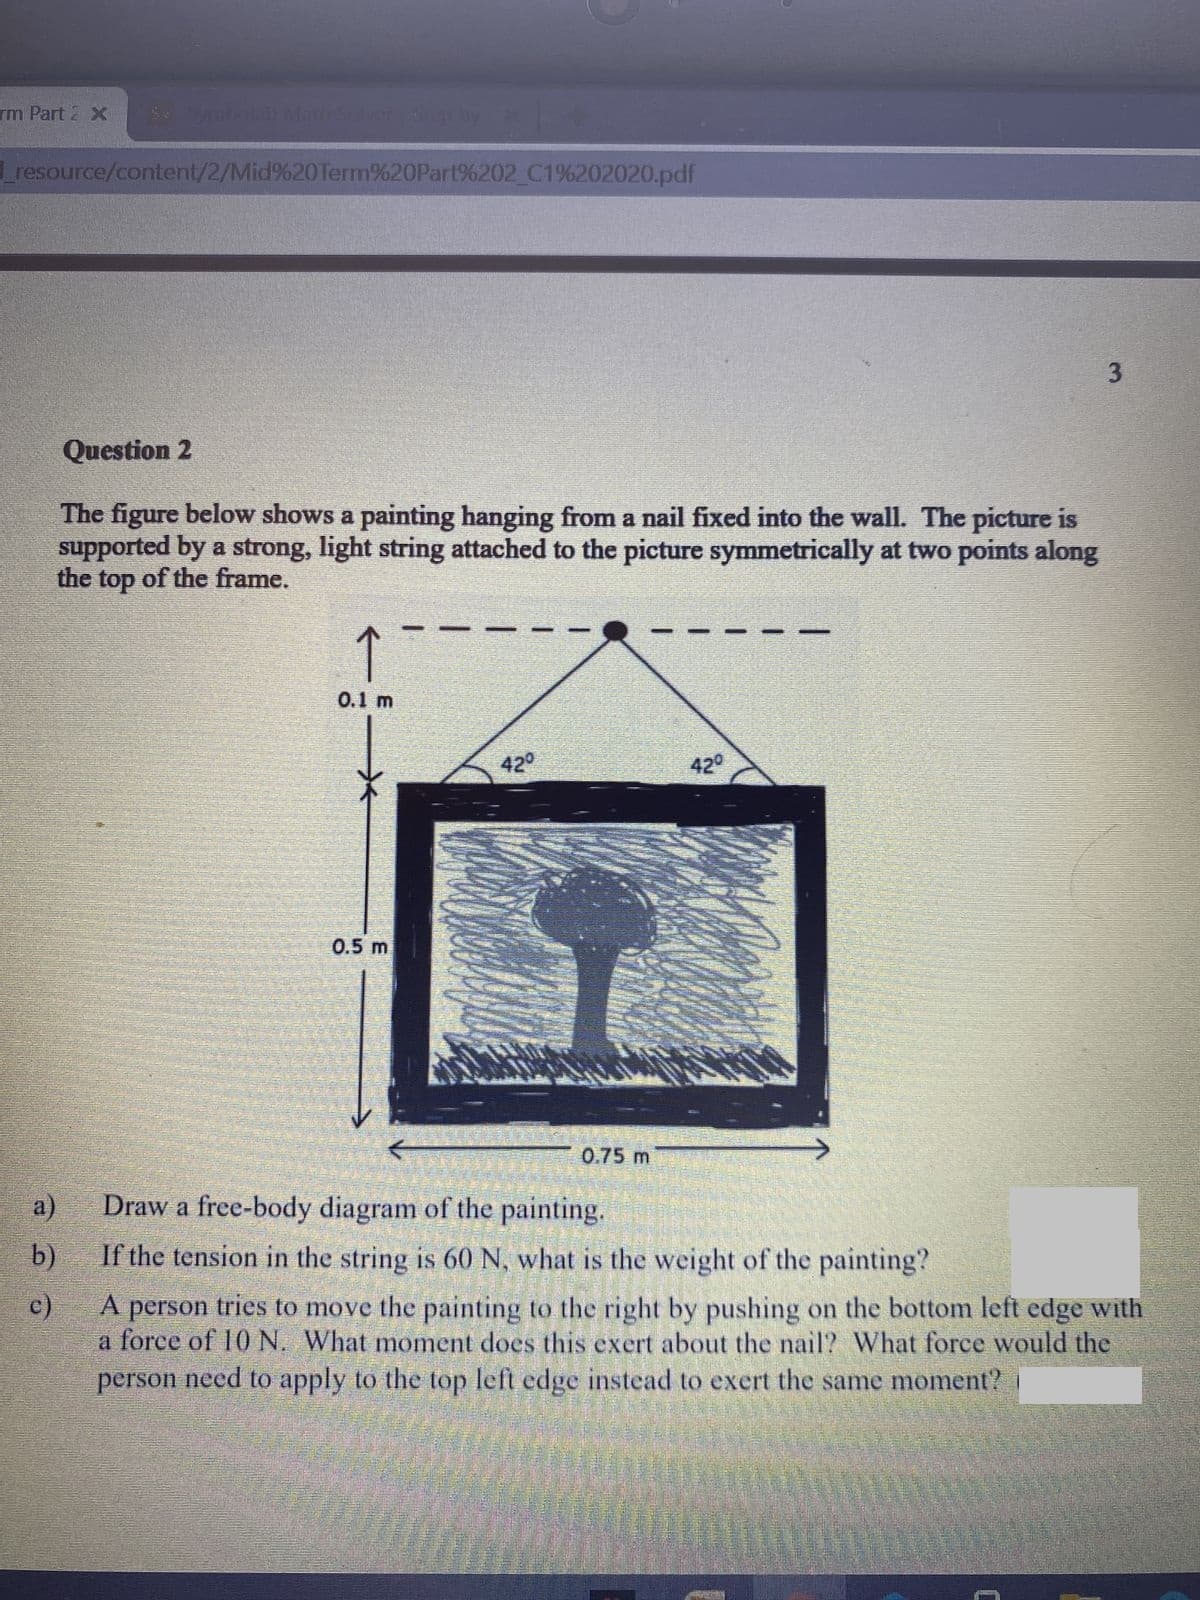 rm Part 2 x
resource/content/2/Mid%20Term%20Part%202 C1%202020.pdf
3
Question 2
The figure below shows a painting hanging from a nail fixed into the wall. The picture is
supported by a strong, light string attached to the picture symmetrically at two points along
the top of the frame.
0.1 m
42°
420
0.5 m
0.75 m
a)
Draw a free-body diagram of the painting.
b)
If the tension in the string is 60 N, what is the weight of the painting?
c)
tries to move the painting to the right by pushing on the bottom left edge with
person
a force of 10 N. What moment does this exert about the nail? What force would the
person need to apply to the top left edge instead to exert the same moment?
